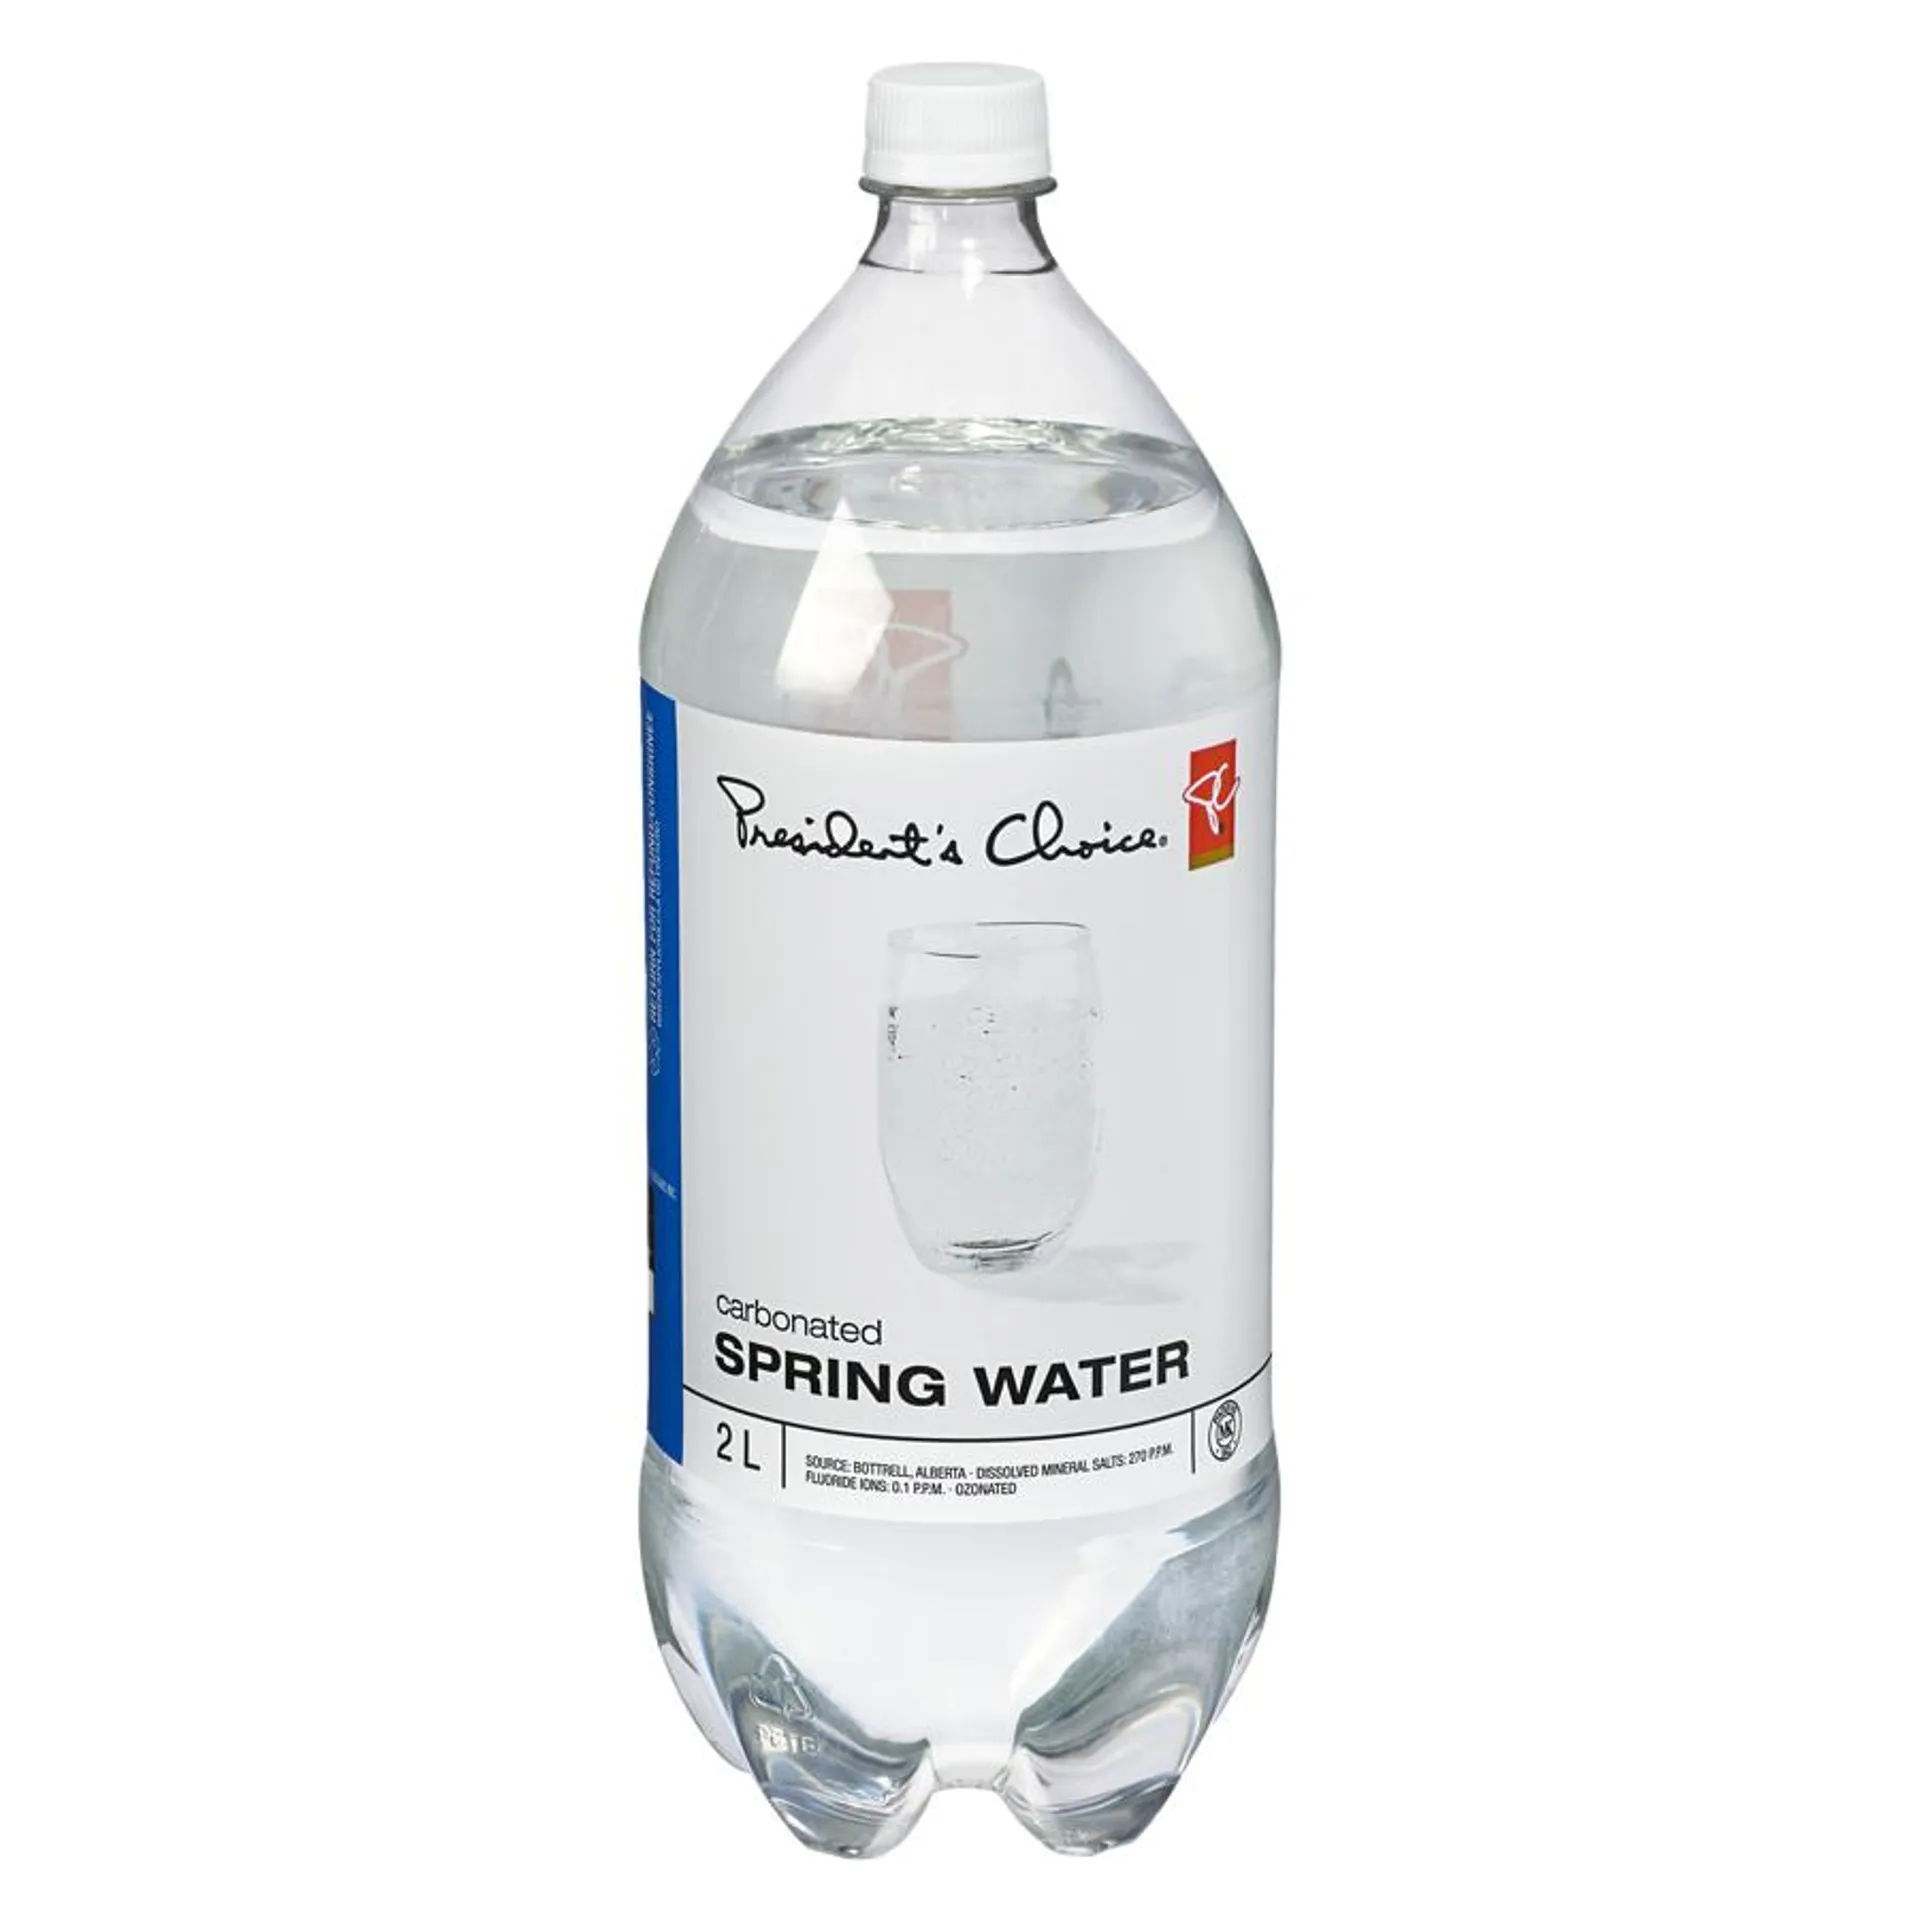 Carbonated Spring Water